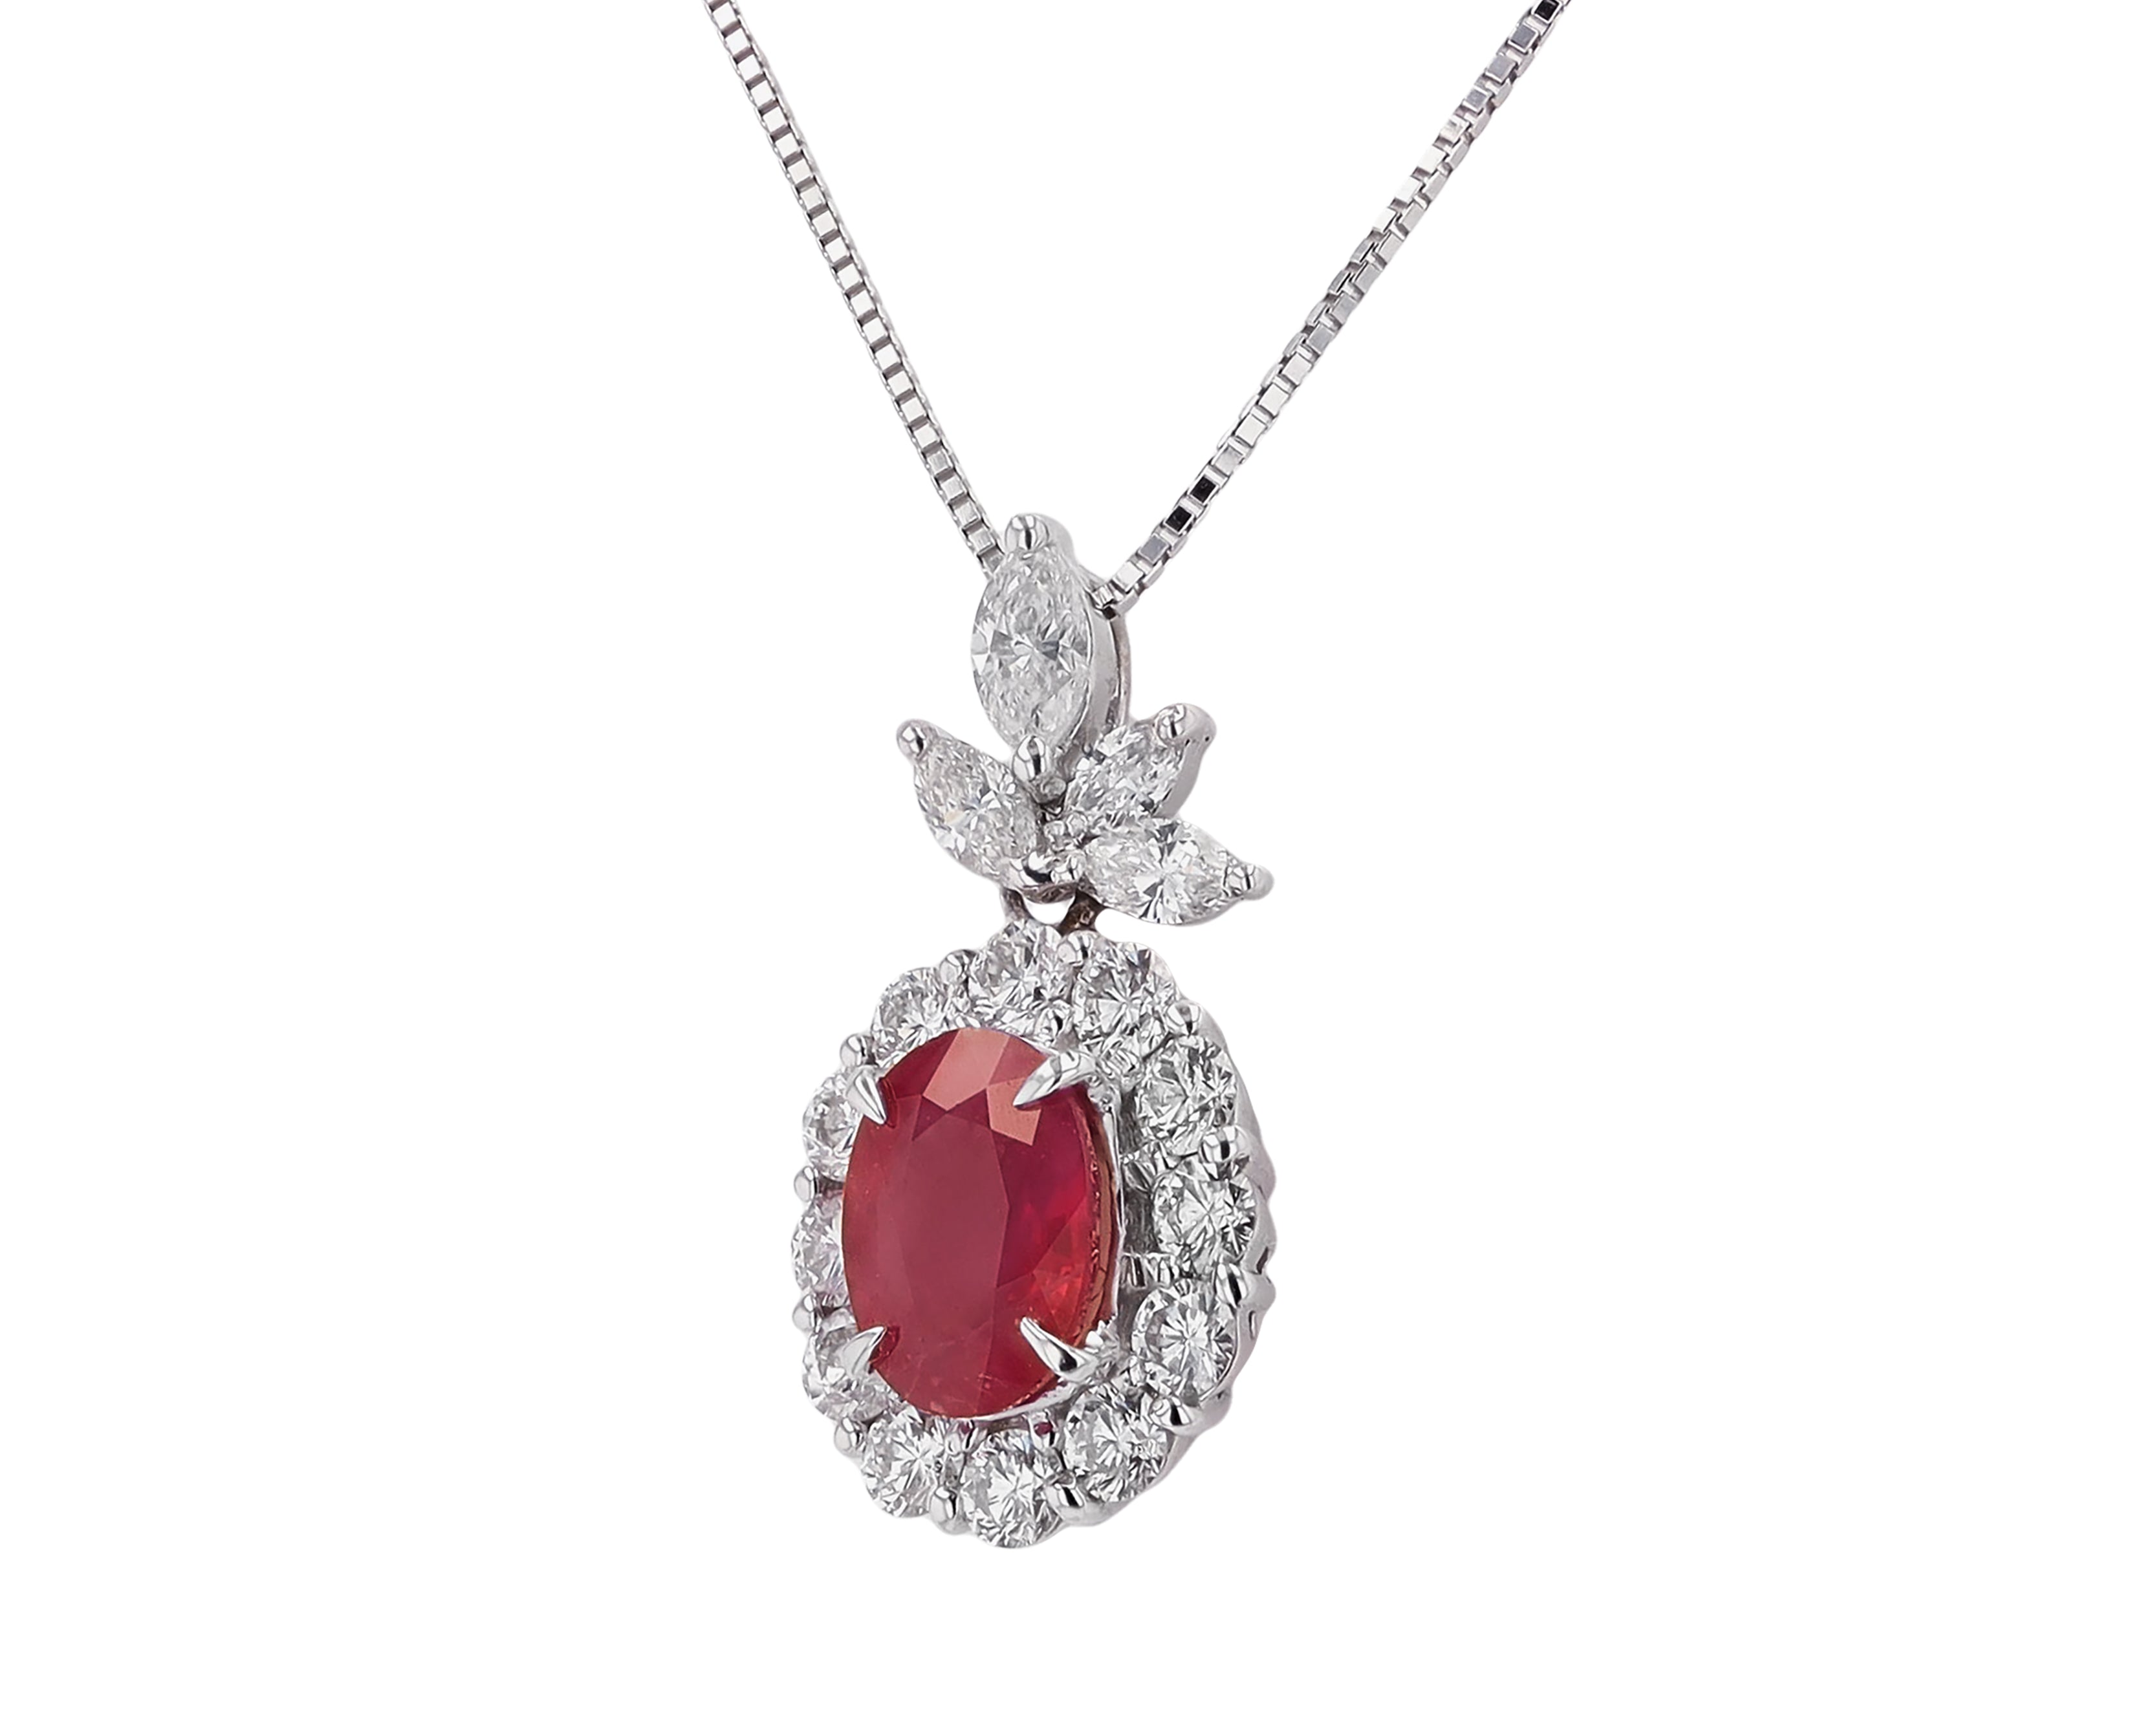 Vintage GIA Certified 1.58ct Burma Ruby Pendant Necklace